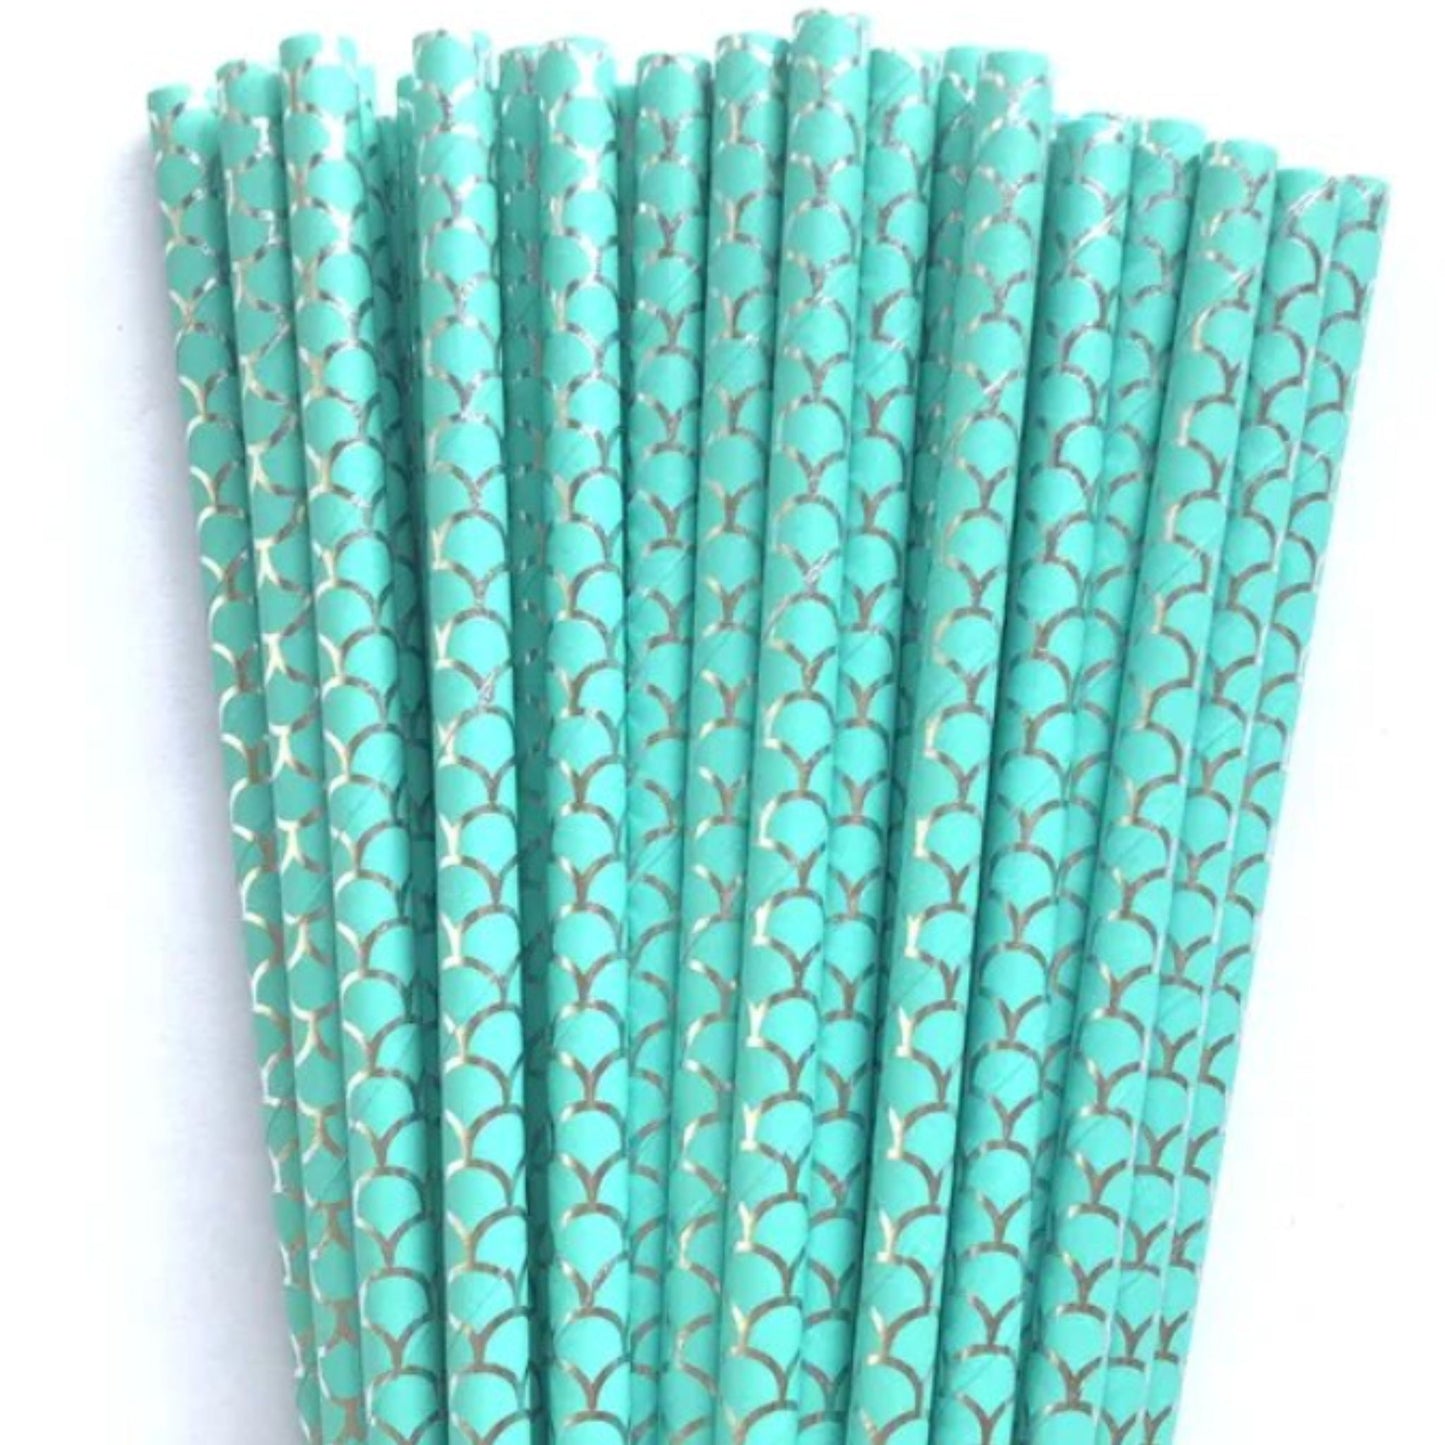 Mermaid pattern paper straws in Turquoise and silver. 25 pack